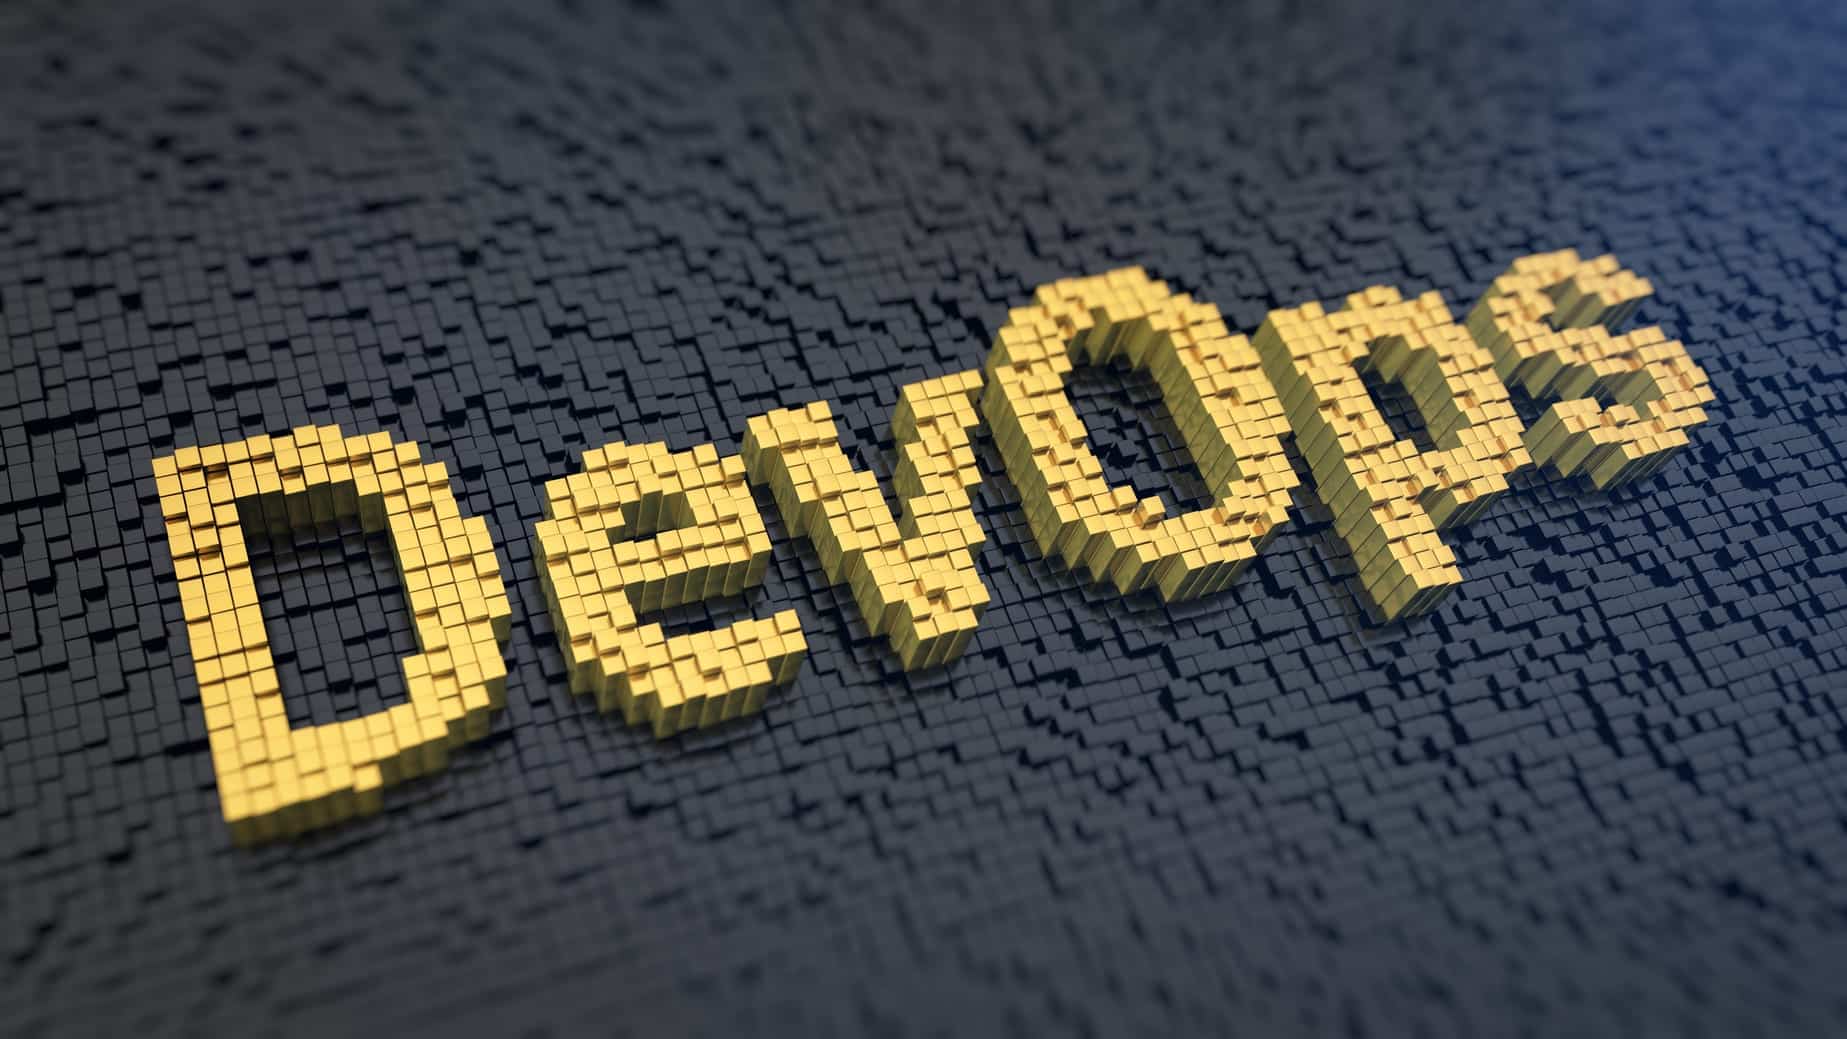 What Is DevOps and Why Should I Know About It?